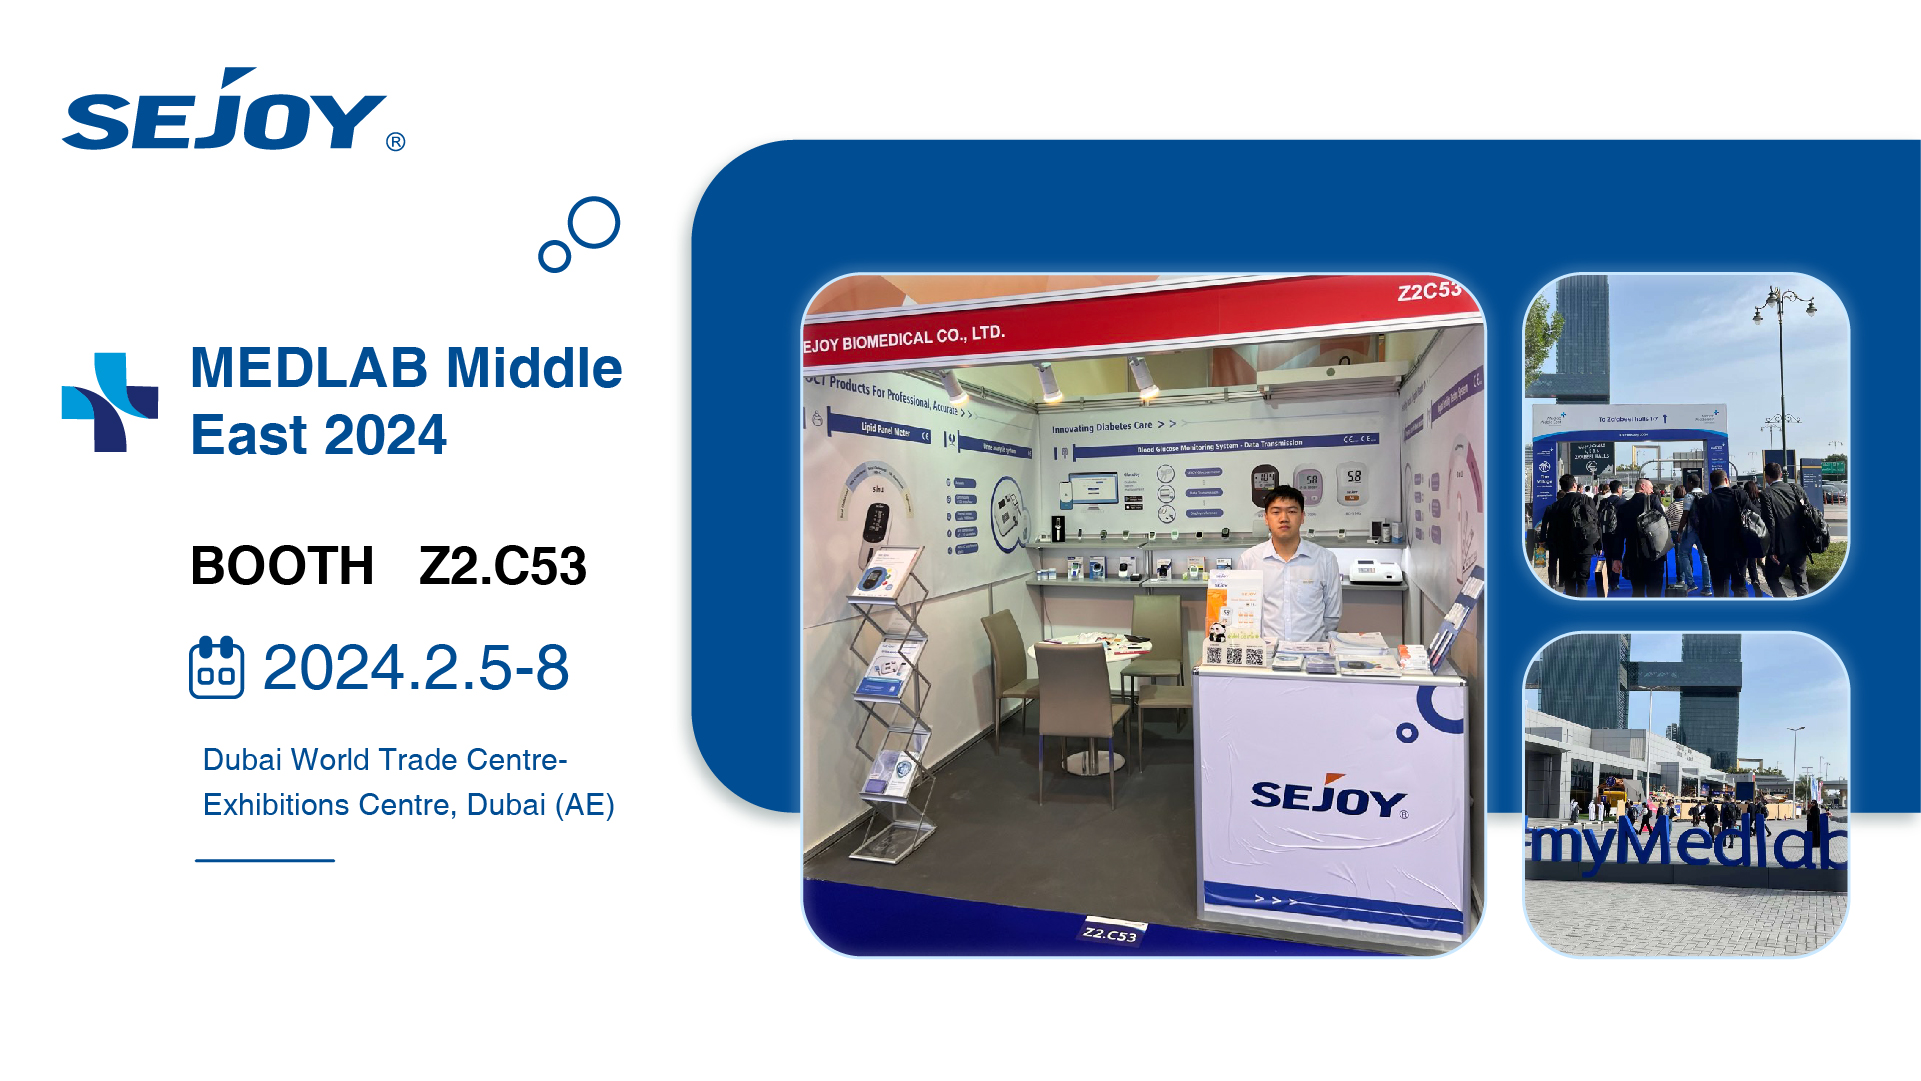 Medlab Middle East 2024 is currently underway, and Sejoy welcomes you to the booth for detailed communication!